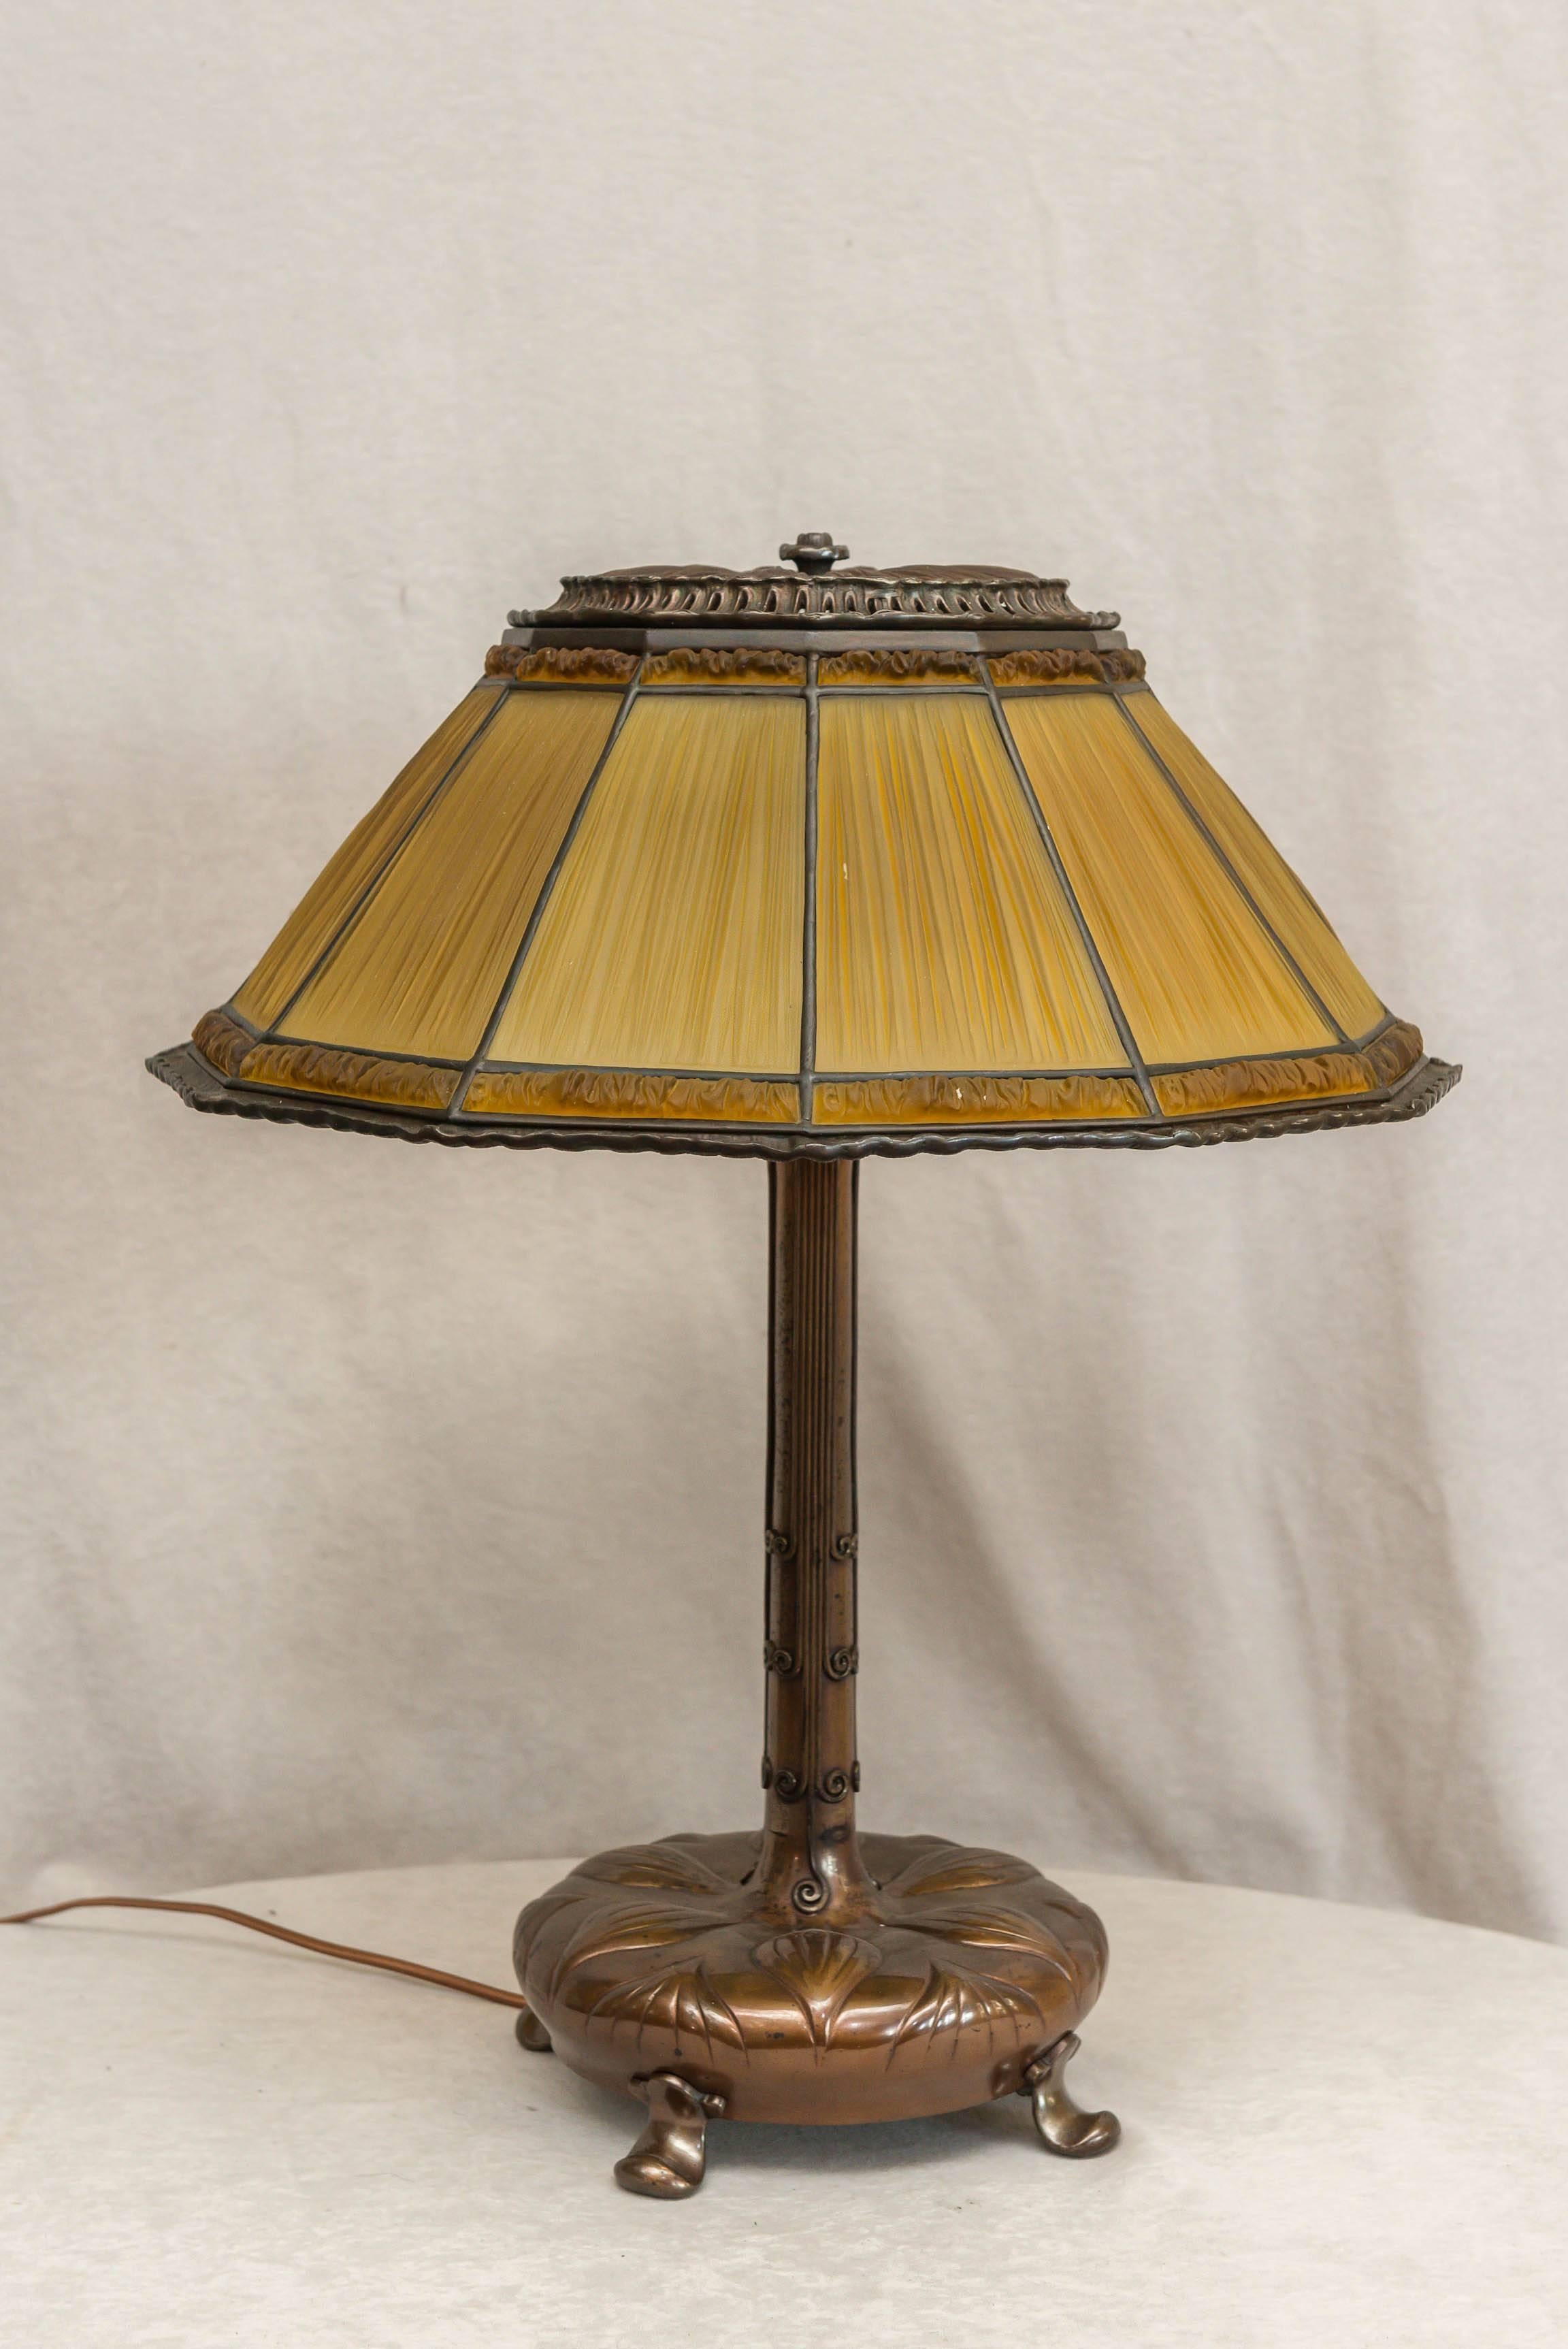 We only sell original period Tiffany Studios lamps, and the linenfold style shades have been our most popular design. Originally meant to go with French furniture with it's elegant and clean look, it has now been used with any furniture from any